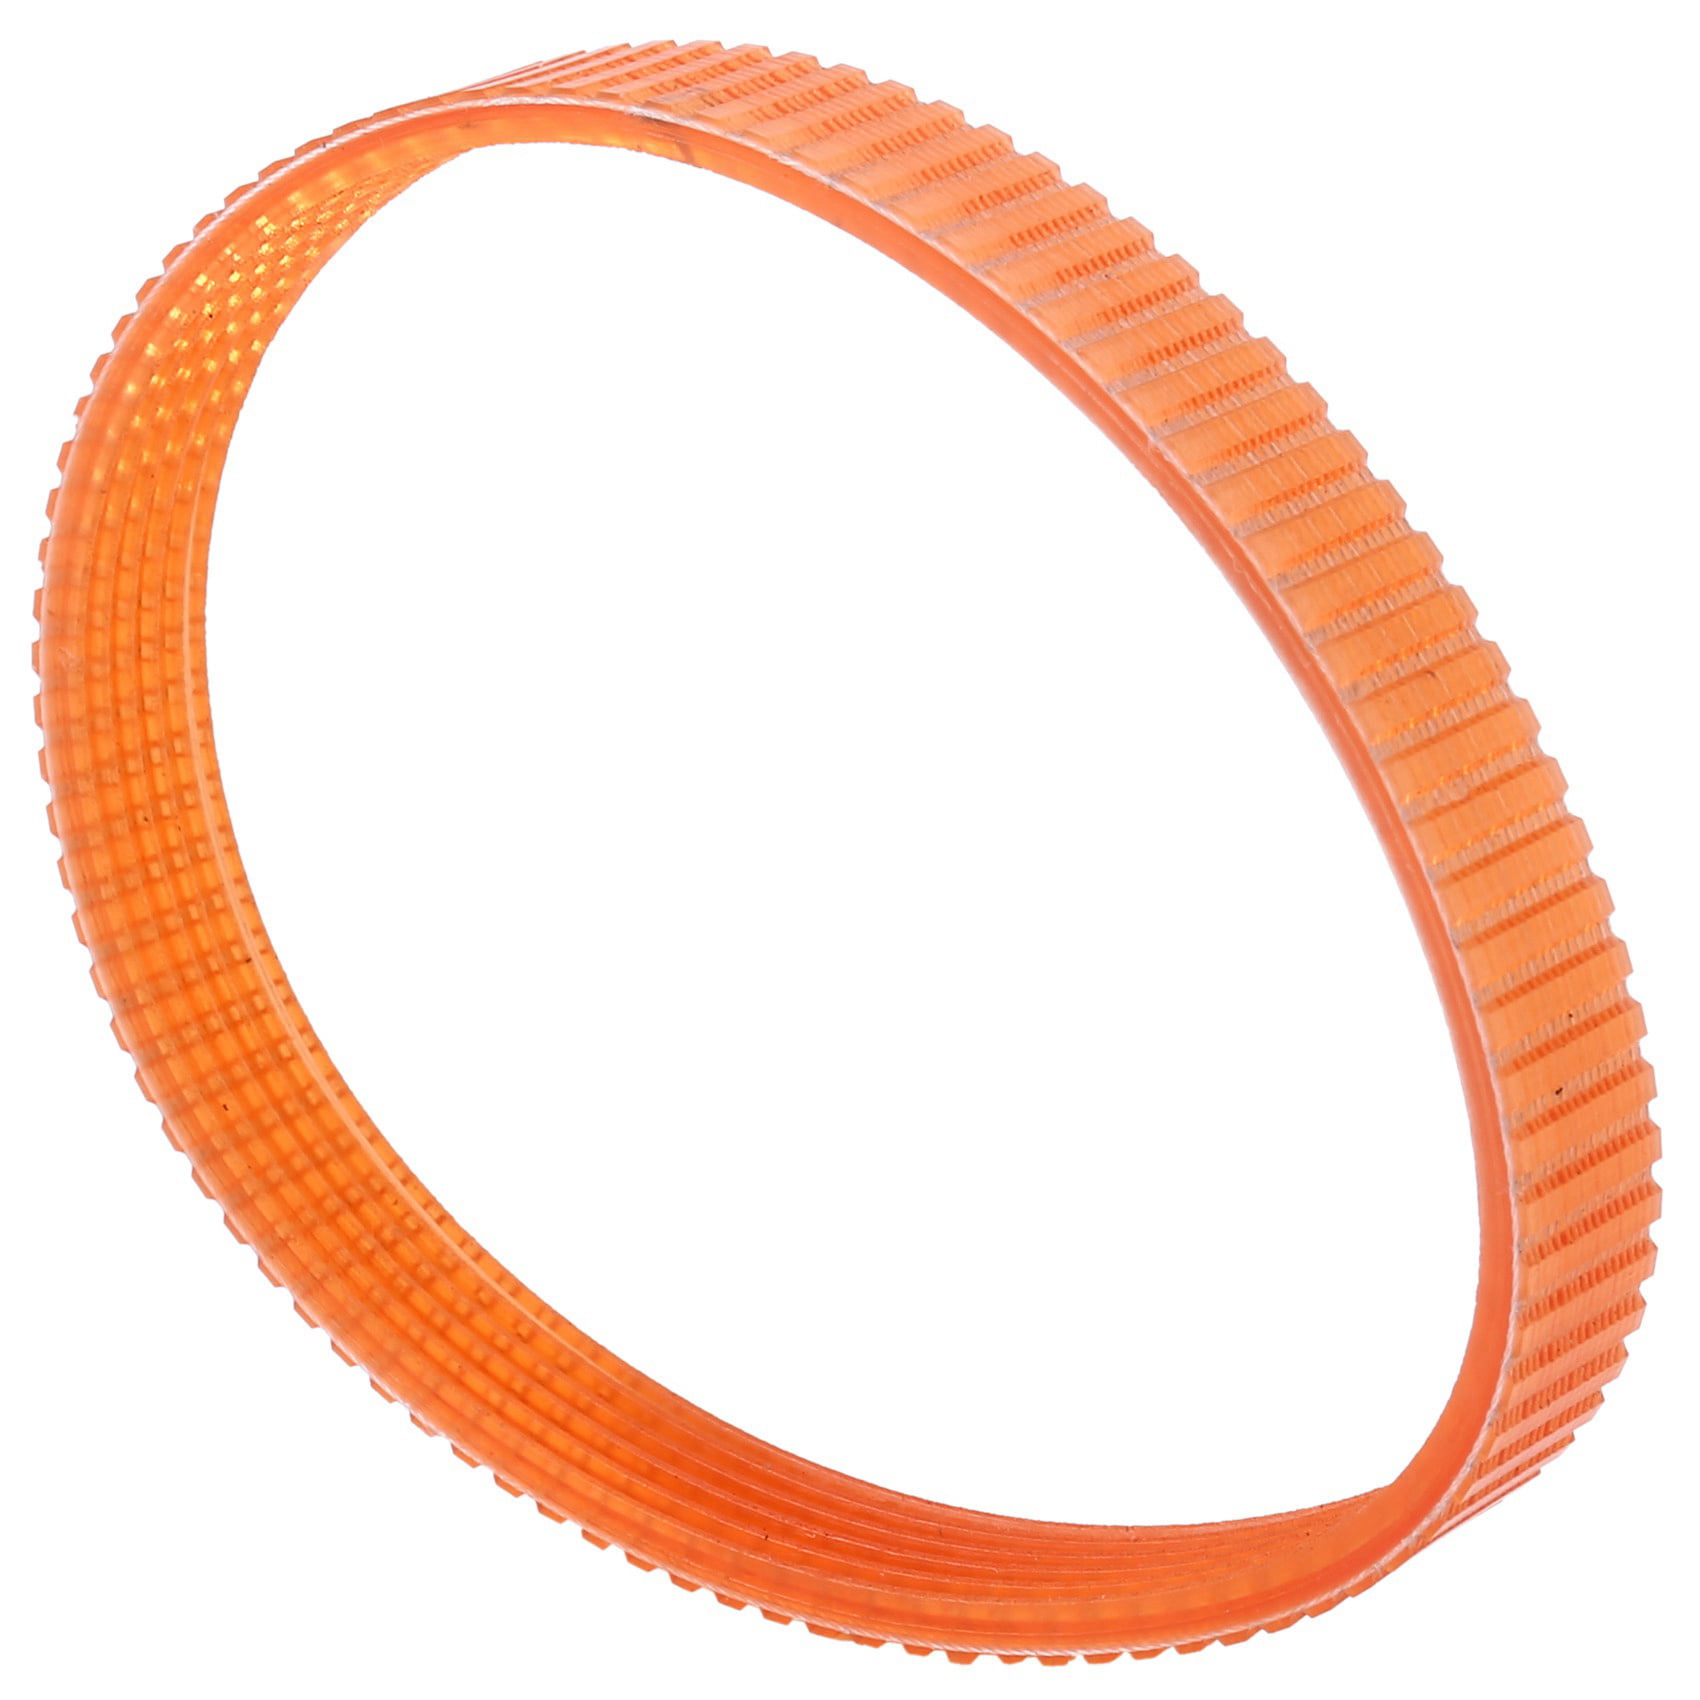 Planer Drive Belt For 9401 Replacement Tools Equipment Orange Electric